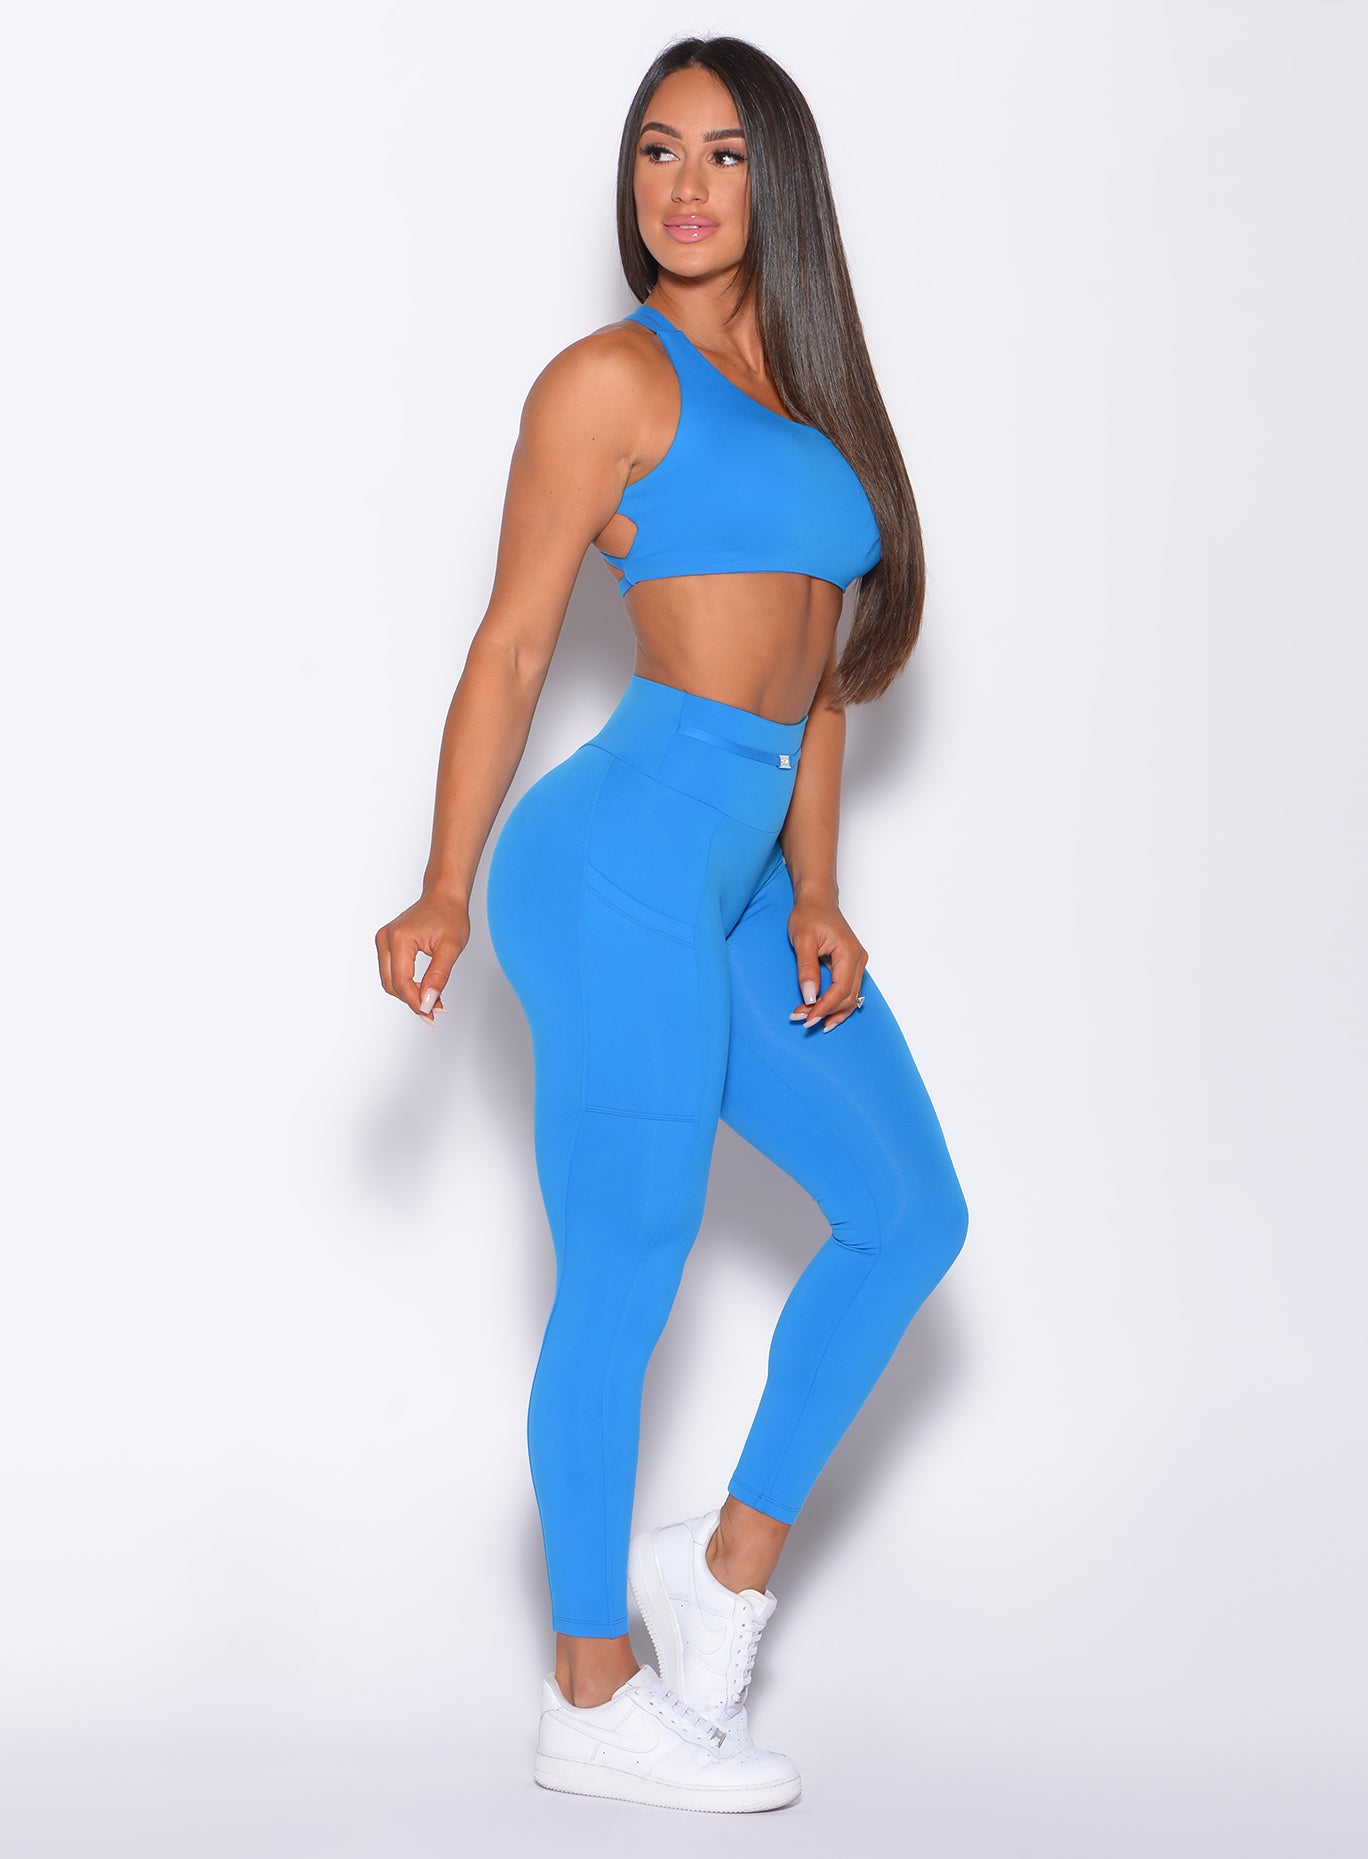 Right side profile view of a model in our barbell leggings in crystal pop blue color and a matching bra